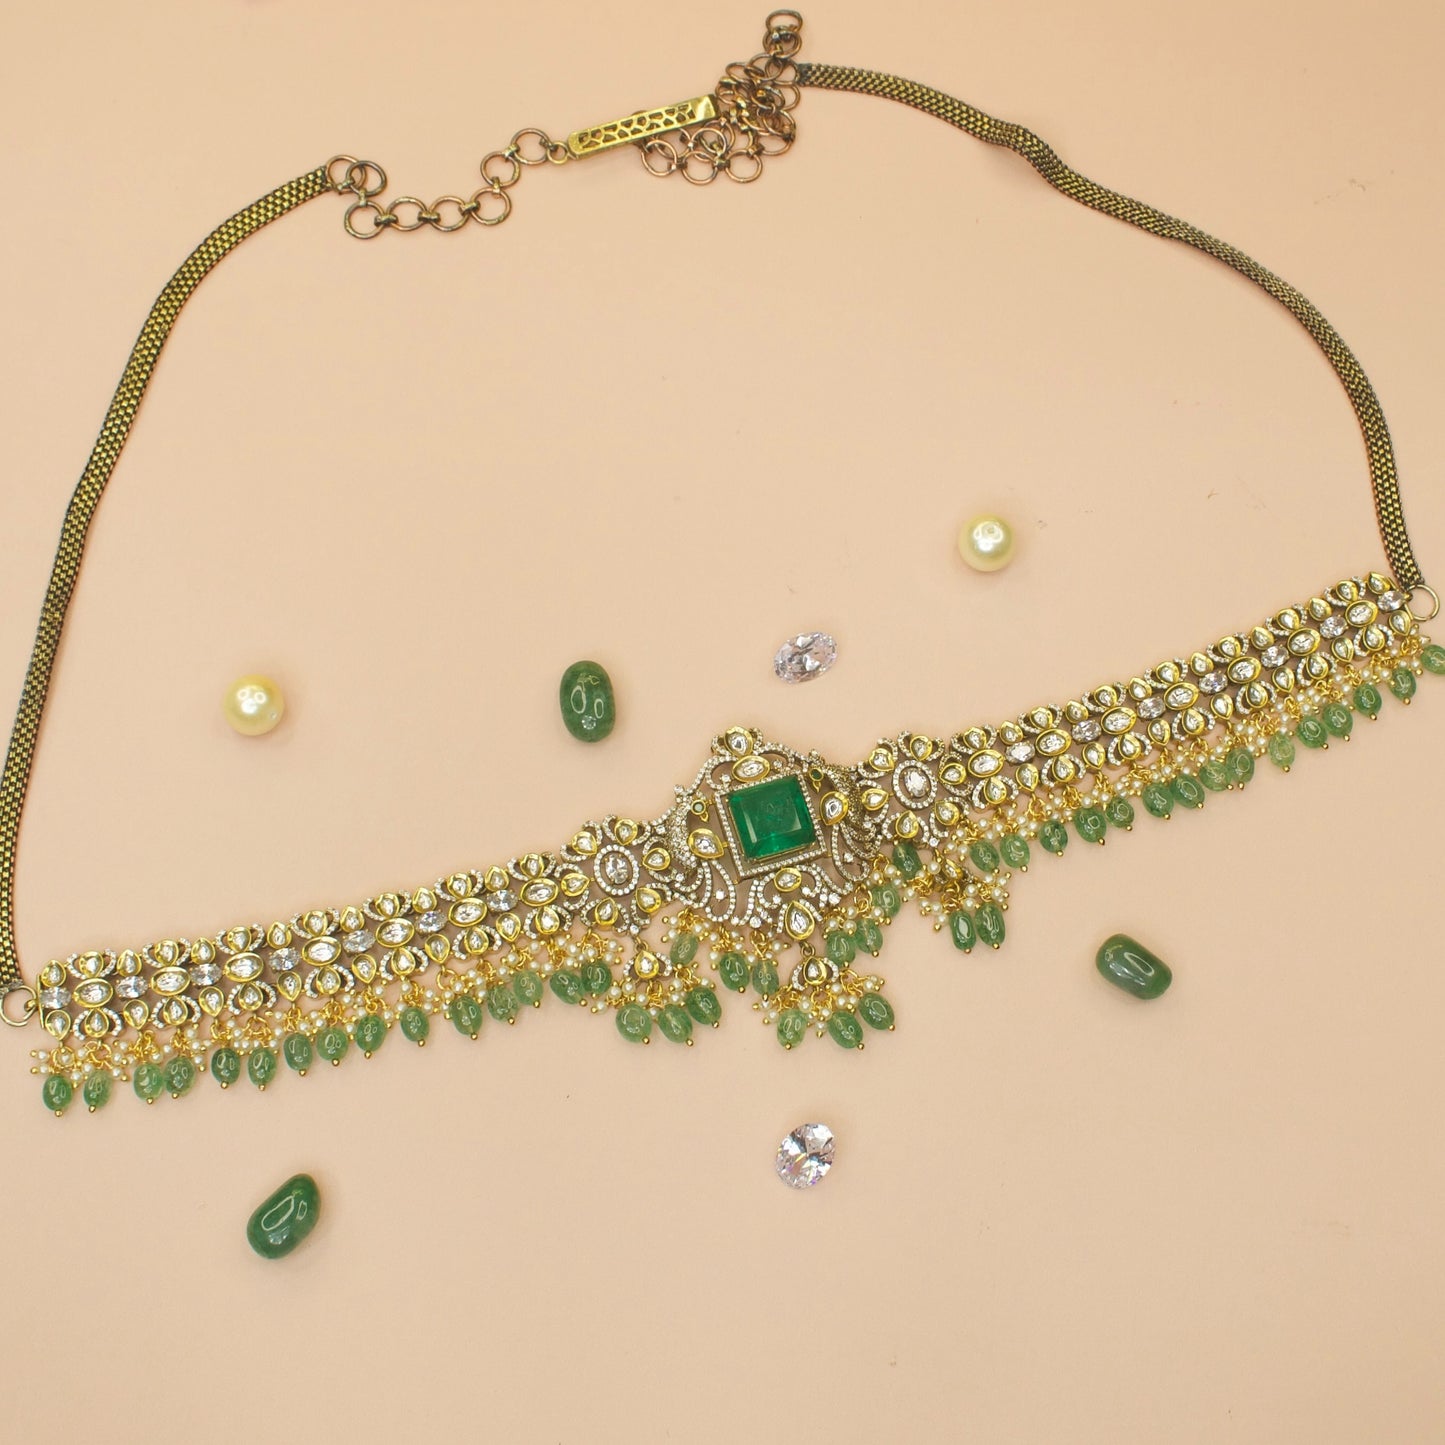 Adorable Victorian Hip Chain, also known as Vaddanam/Waist chain, with zircon, polki, emerald, pearls, and beads. Available in a lustrous green colour variant.